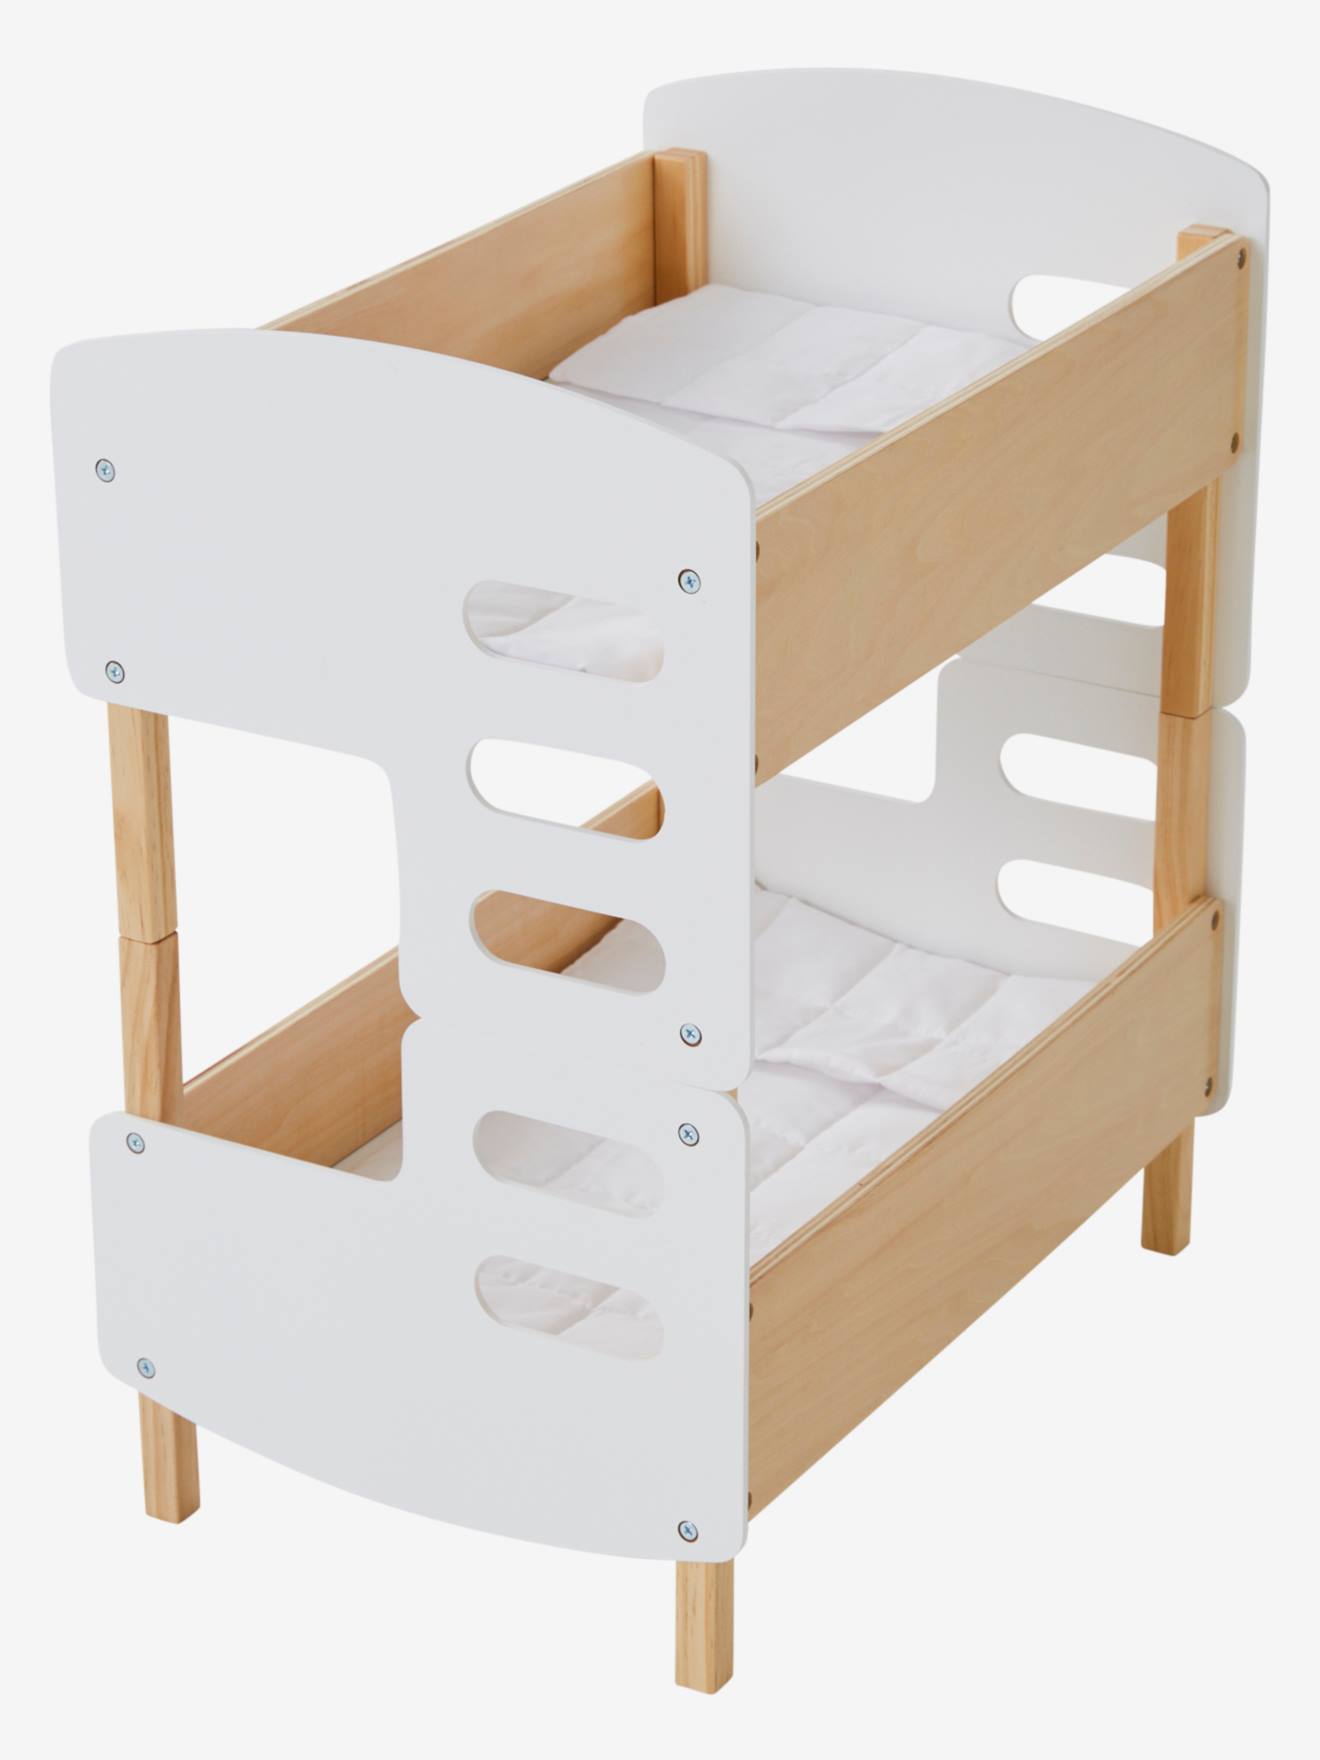 Wooden Bunk Bed For Dolls Light Pink, Wooden Toy Bunk Beds